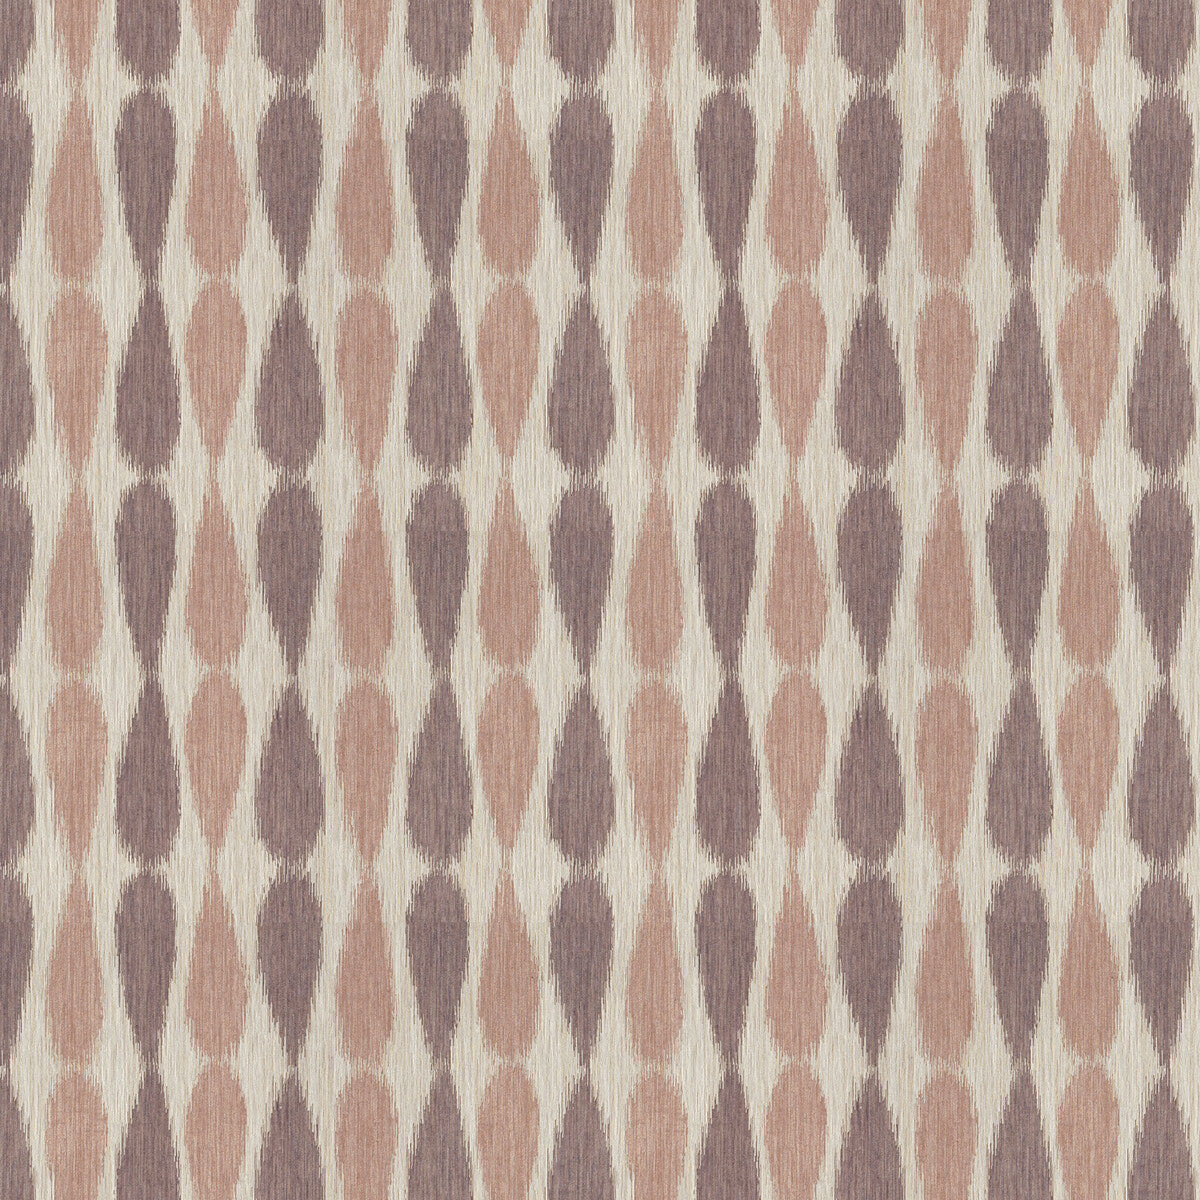 Ikat Drops fabric in lilac color - pattern GWF-2927.10.0 - by Lee Jofa Modern in the Allegra Hicks II collection